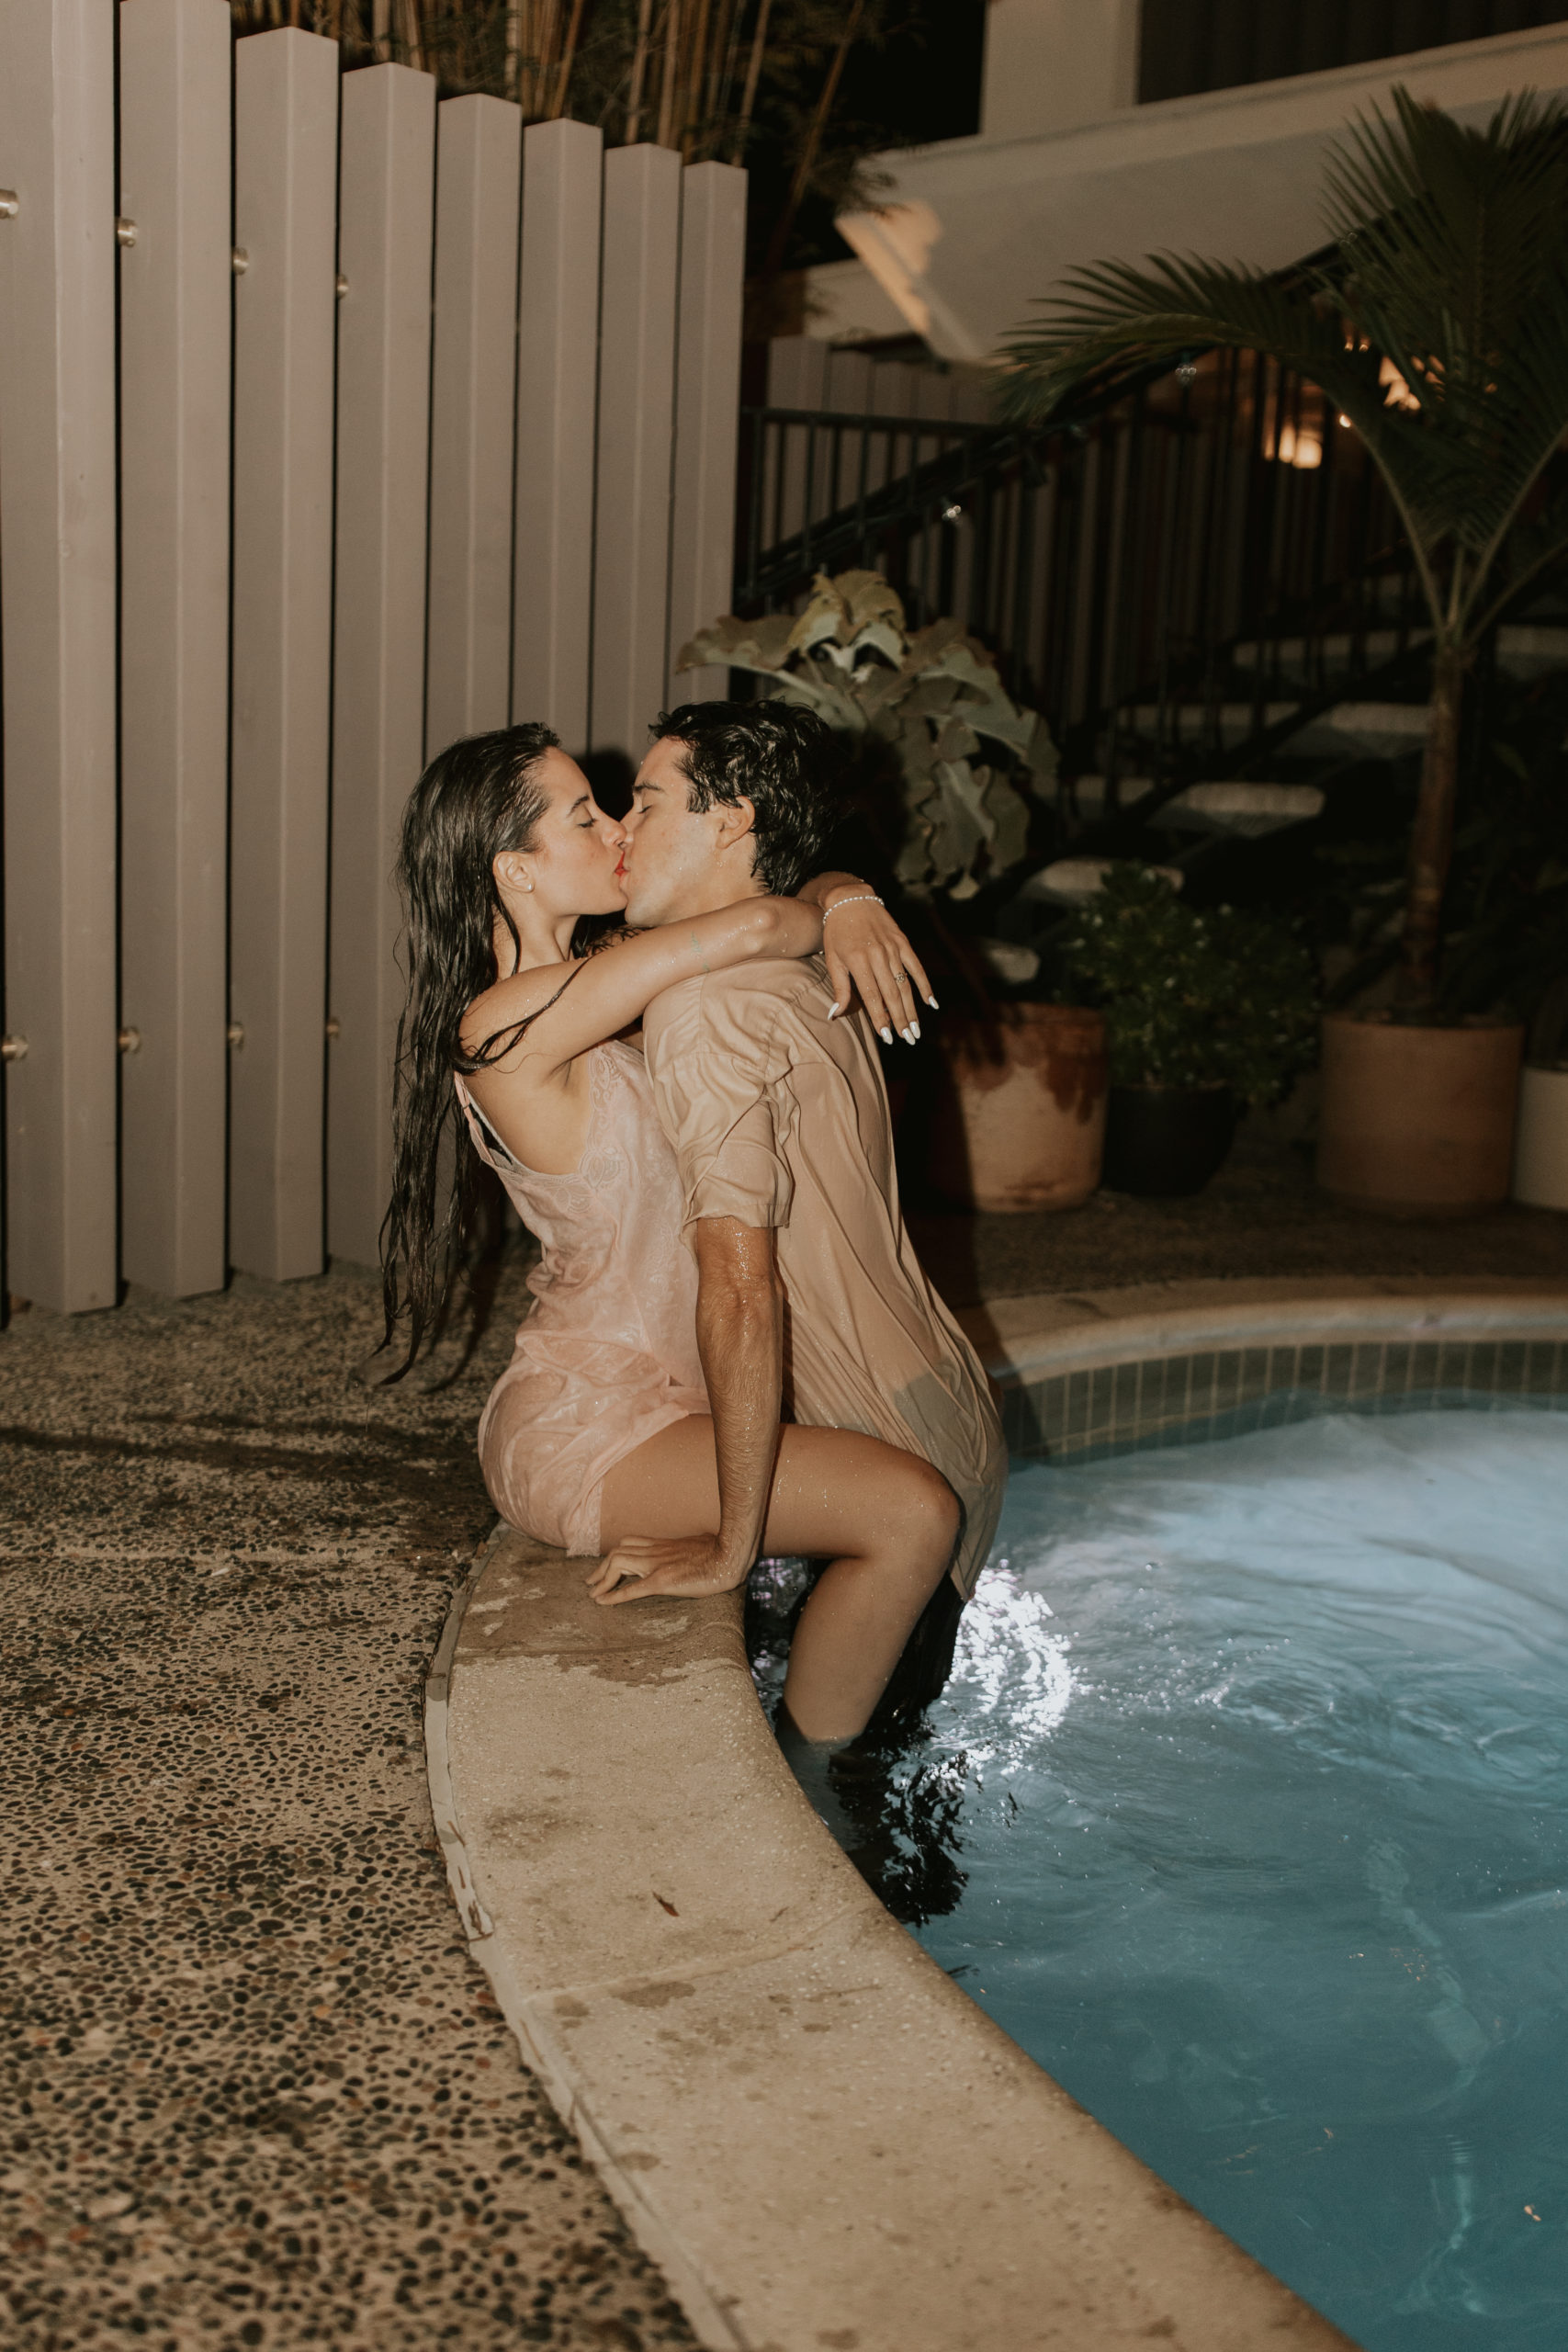 A couple kissing while sitting on the outside of a pool for an engagement session photoshoot in a boutique hotel